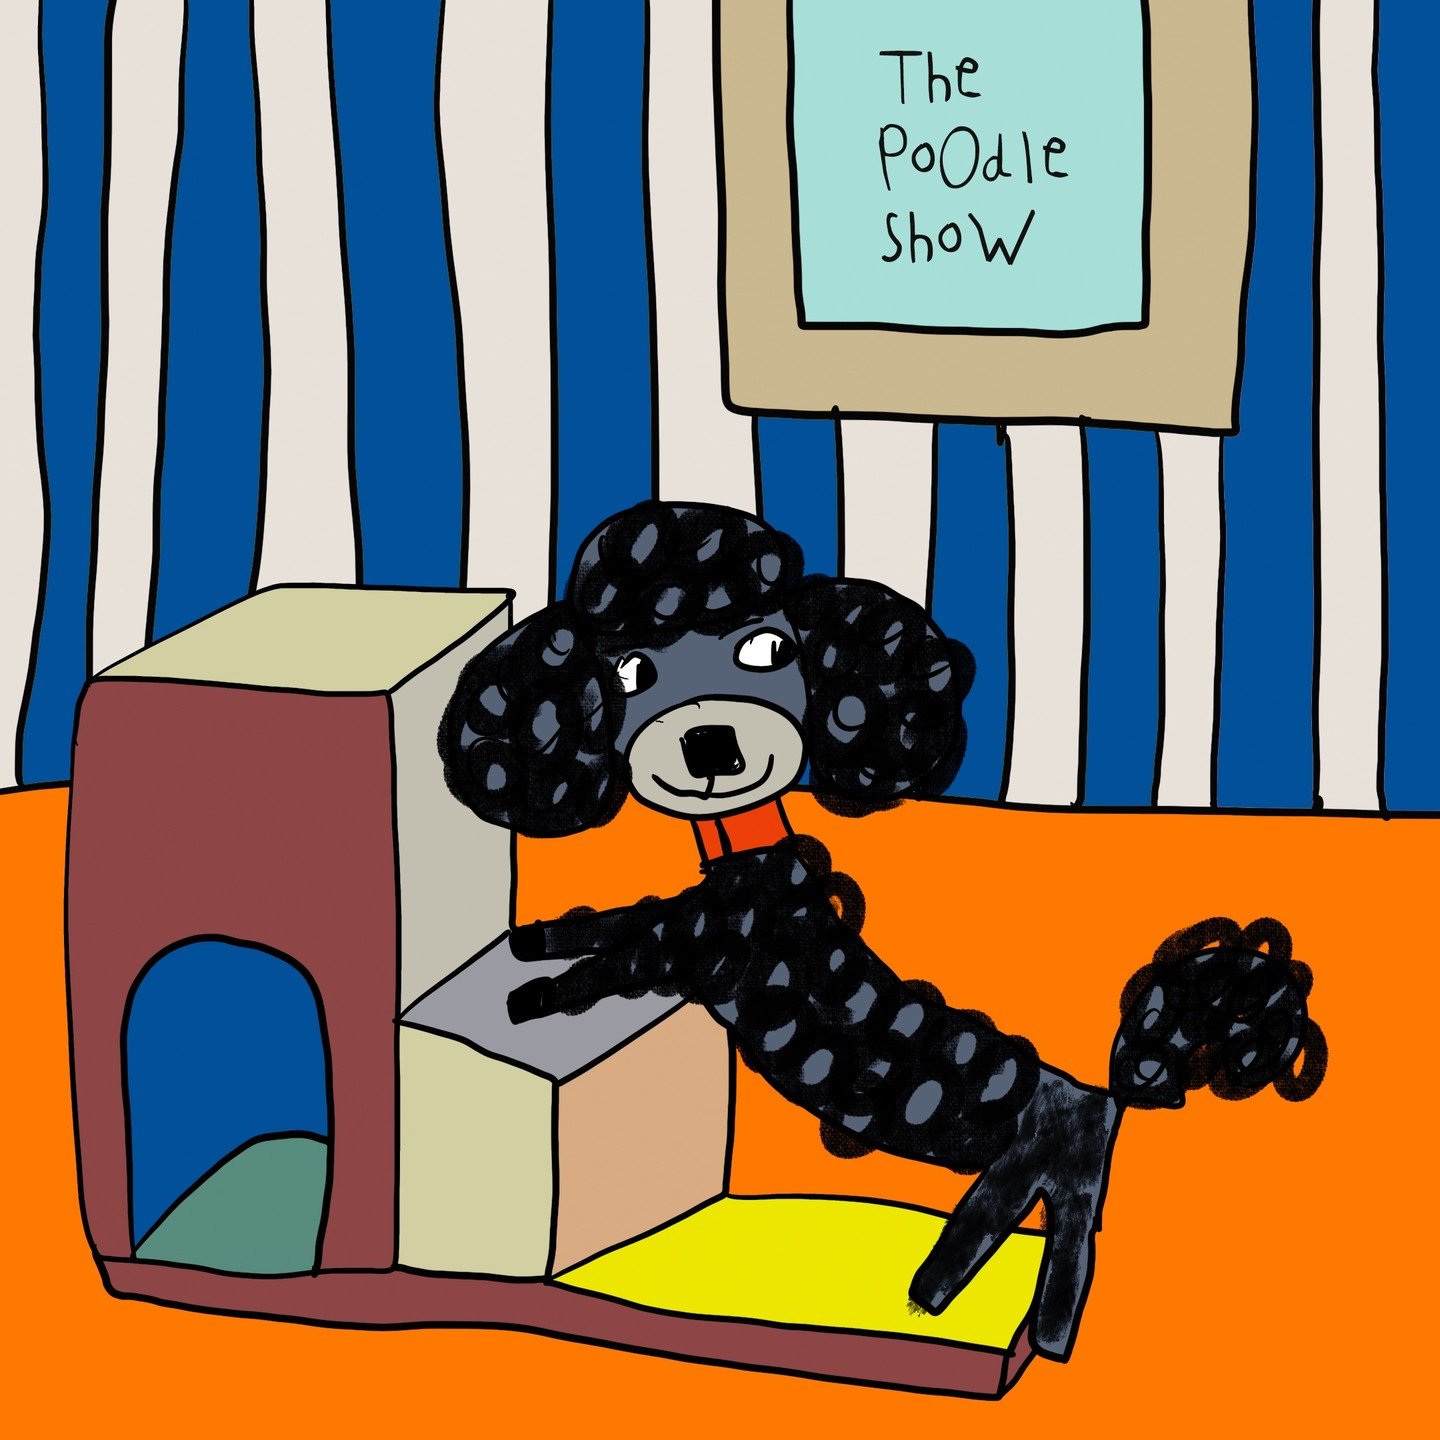 Working on a new show ;-) Poodles, what else? #thepoodleshow #sarahcorynen #illustratedstories #poodles #comingsoon